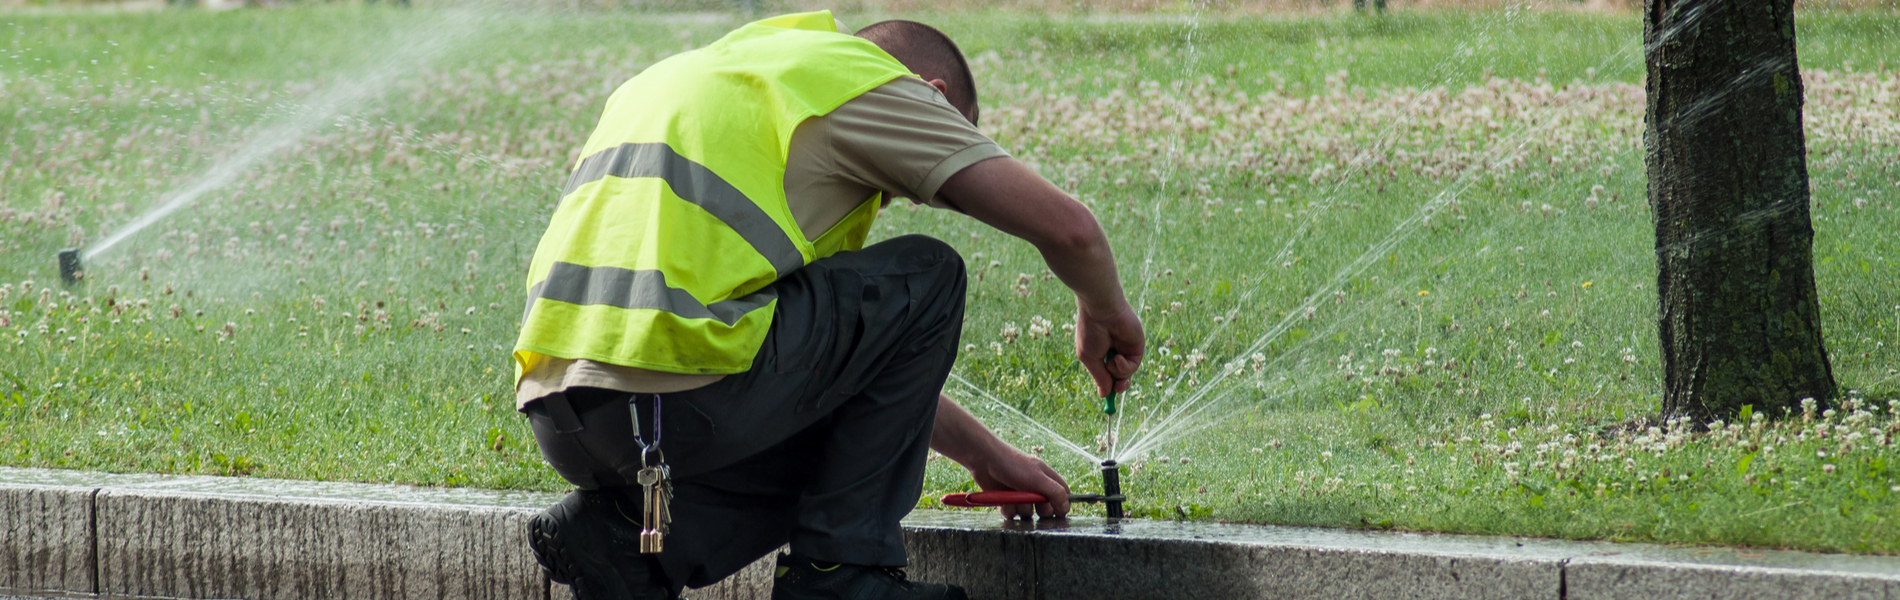 Sprinkler System Installation St. Louis | St. Louis area lawn care | Lawn Sprinklers of St. Louis